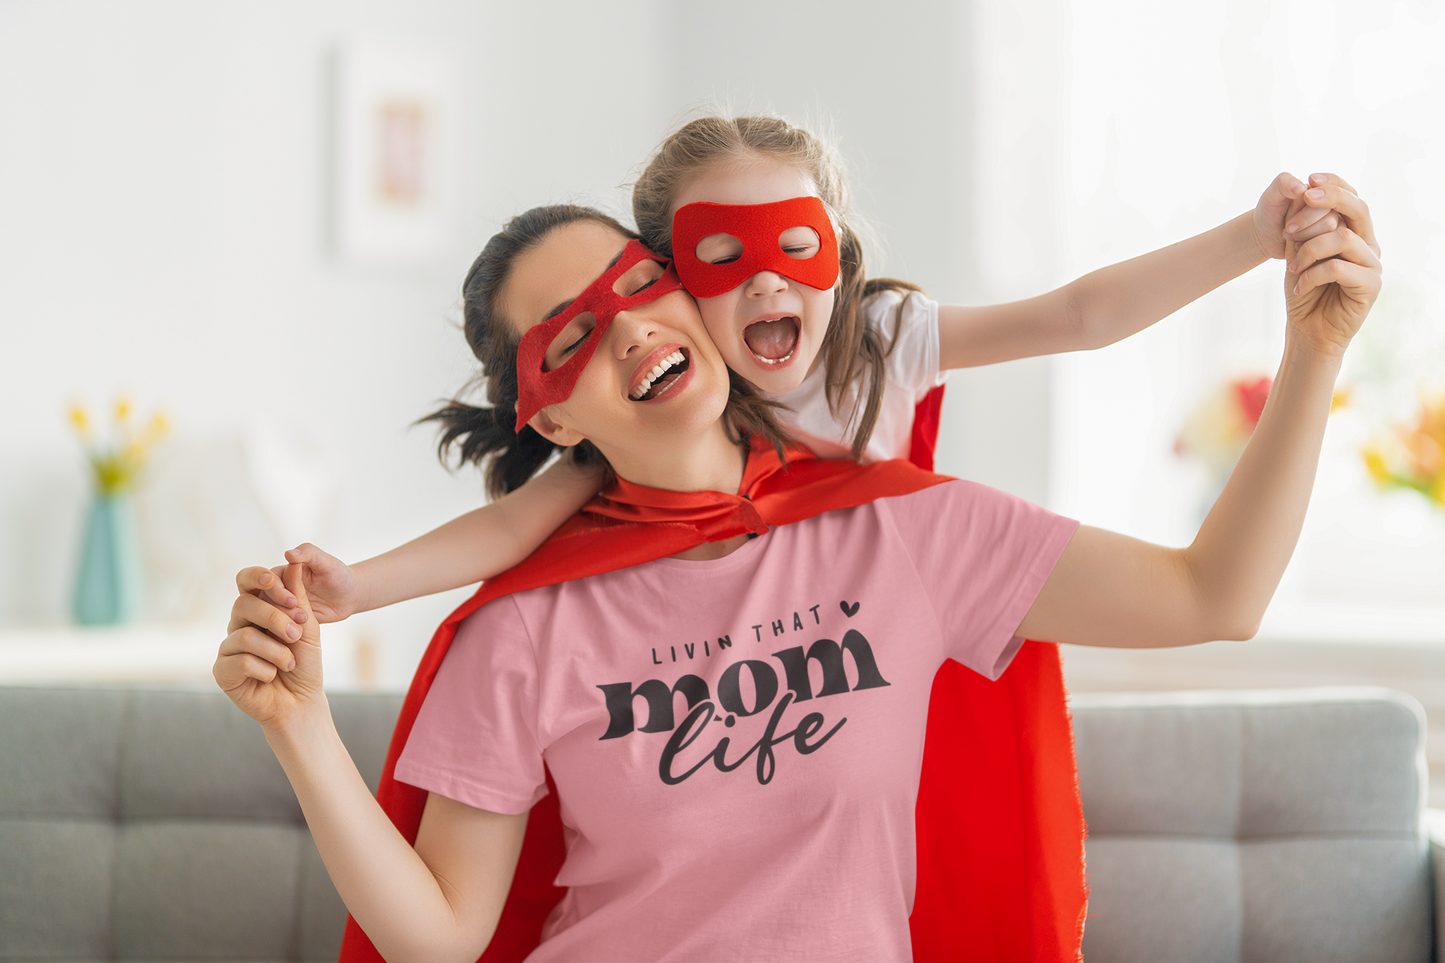 "Livin That Mom Life" Mother's Day Ladies T-Shirt